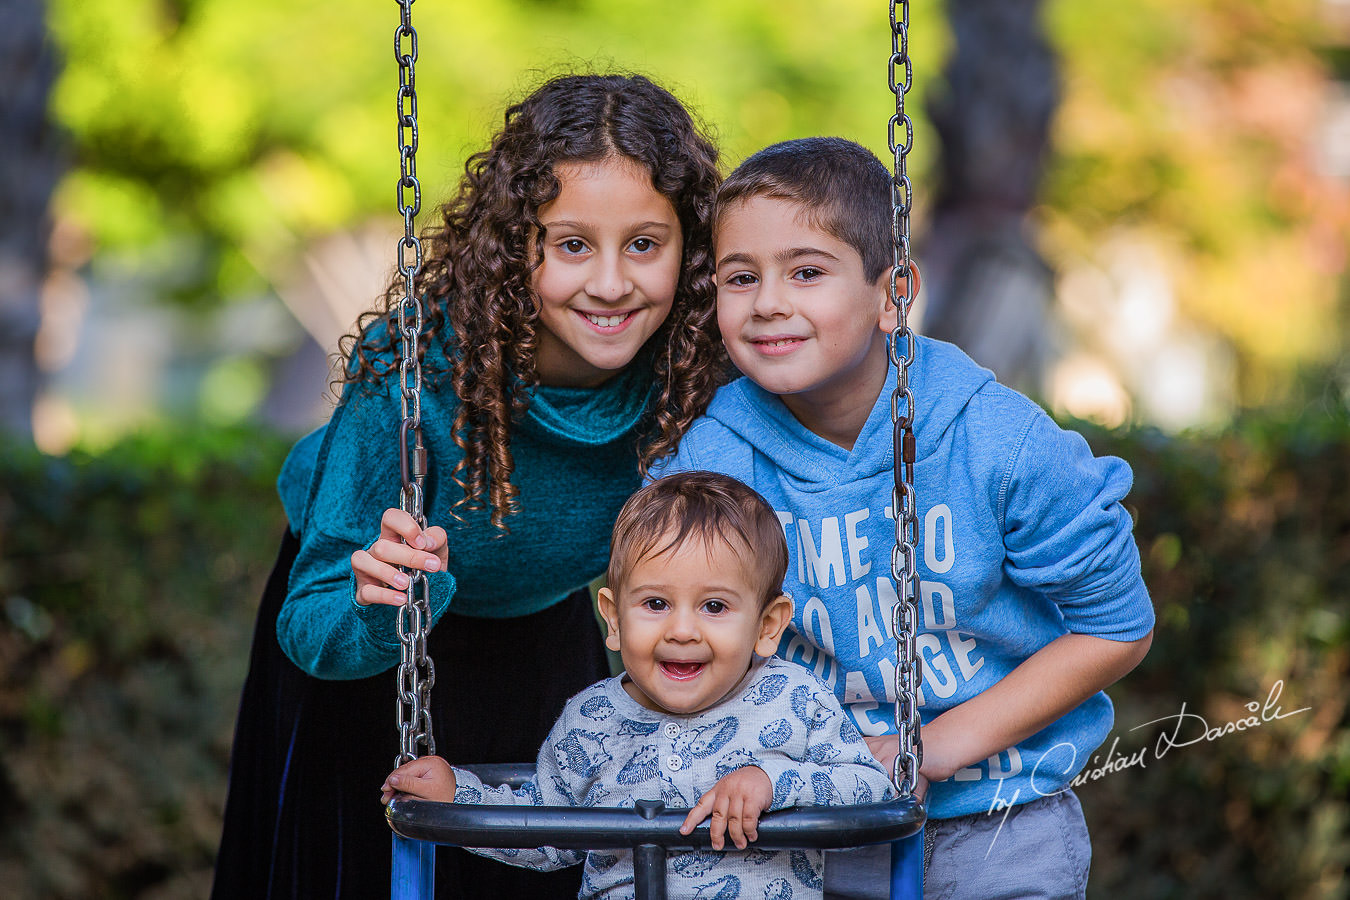 Brothers and sister in the park, moments captured by Cristian Dascalu during a beautiful Limassol family photography photo session.